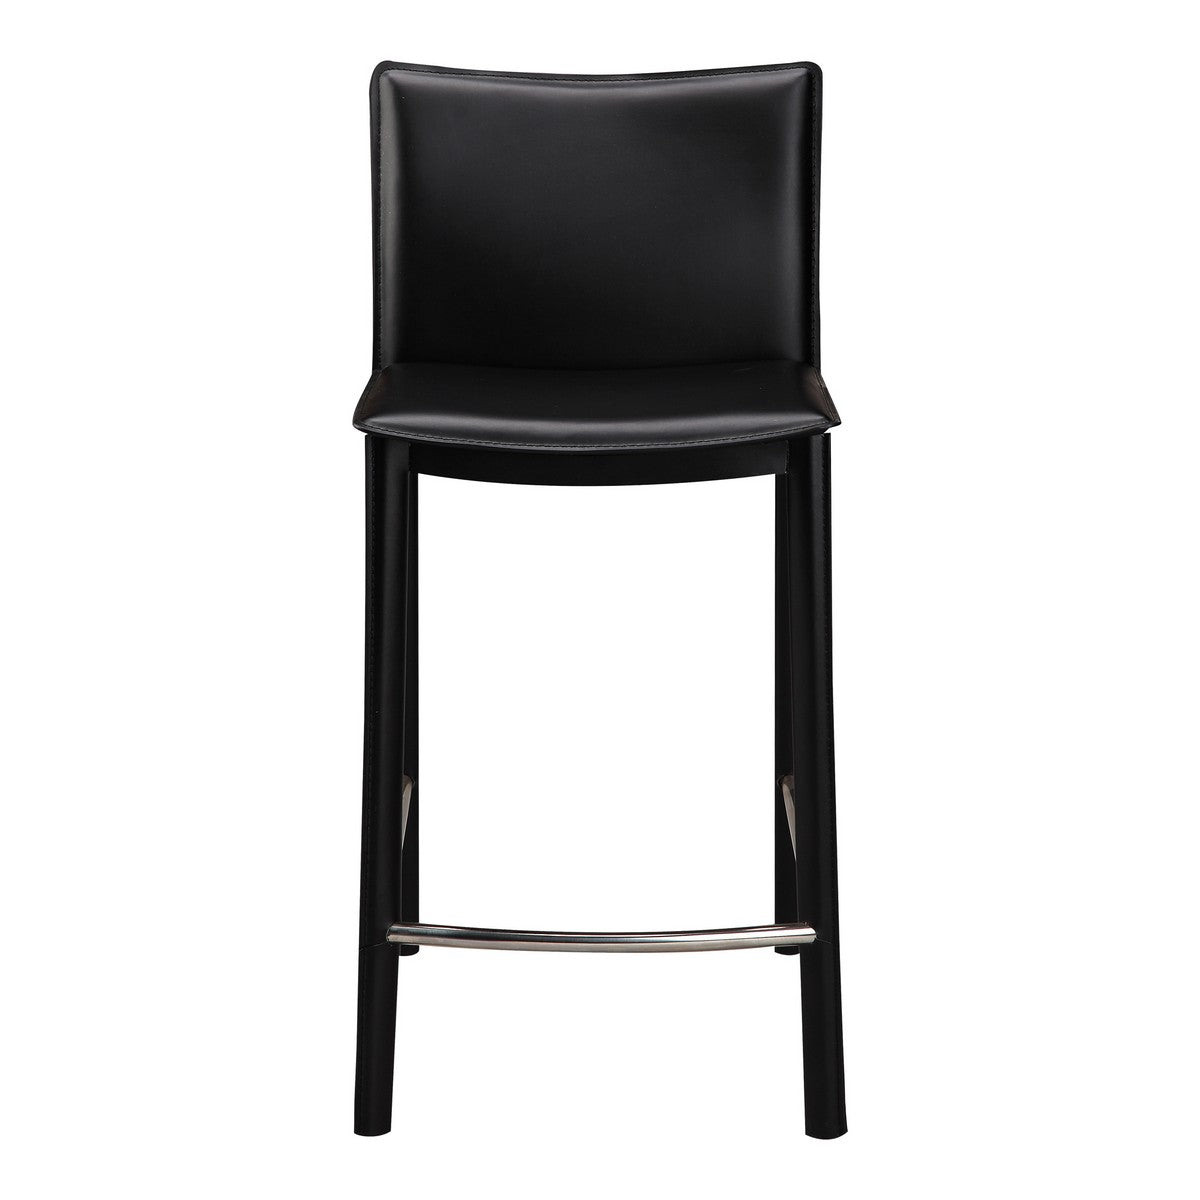 Moe's Home Collection Panca Counter Stool 26" Black - EH-1034-02 - Moe's Home Collection - Counter Stools - Minimal And Modern - 1